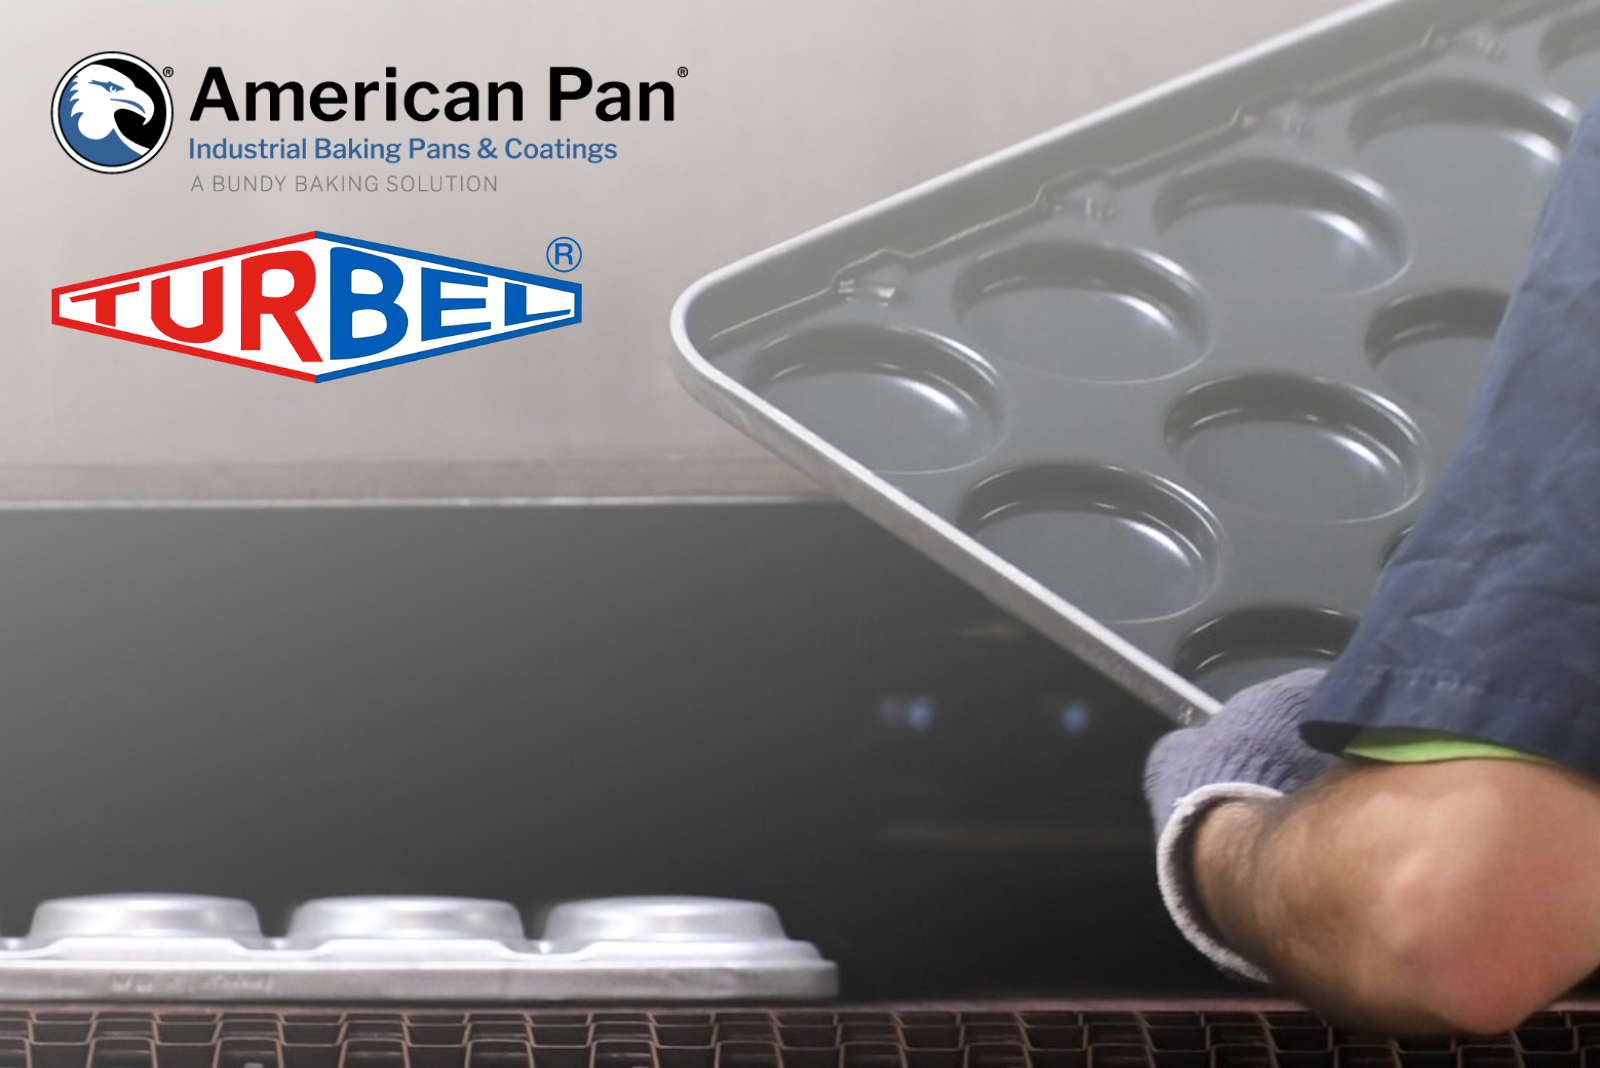 Bundy's American Pan prepares for future with Turbelco partnership - Commercial  Baking